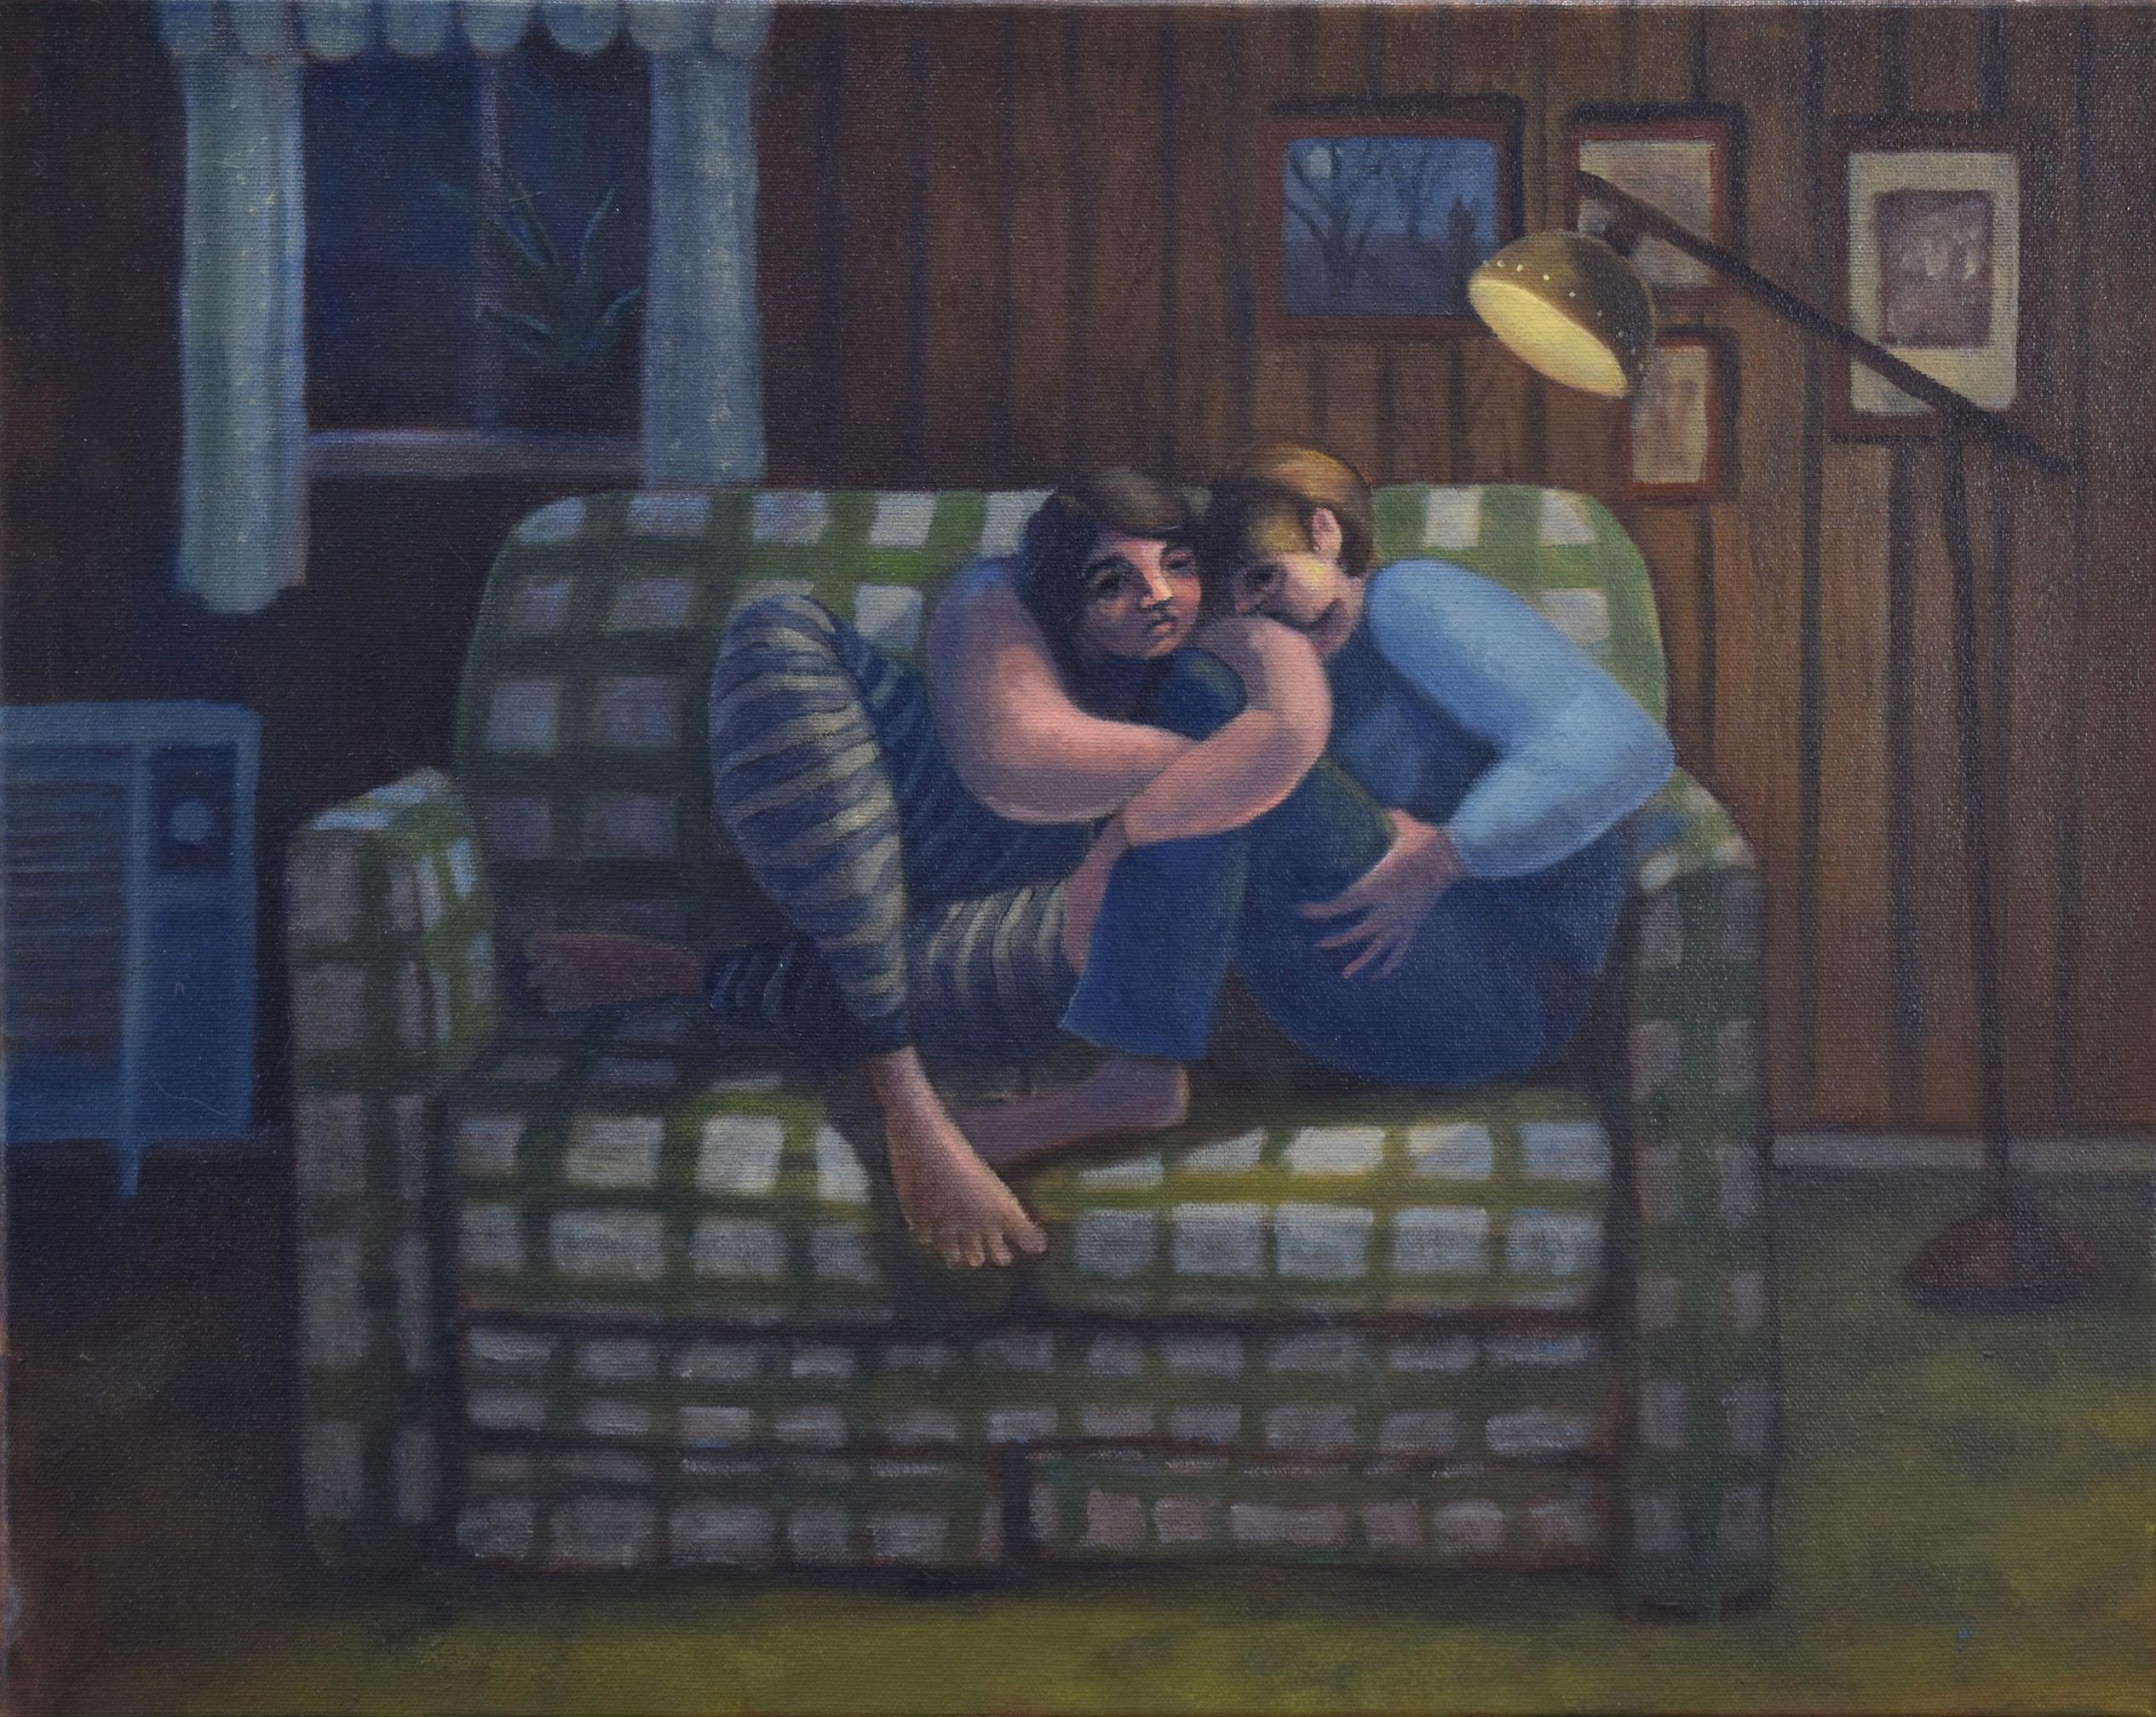 Our Green Checked Couch, is a painting by Emily Royer depicting two figures resting on each other in a dark wood paneled room with a single lamp lit. 